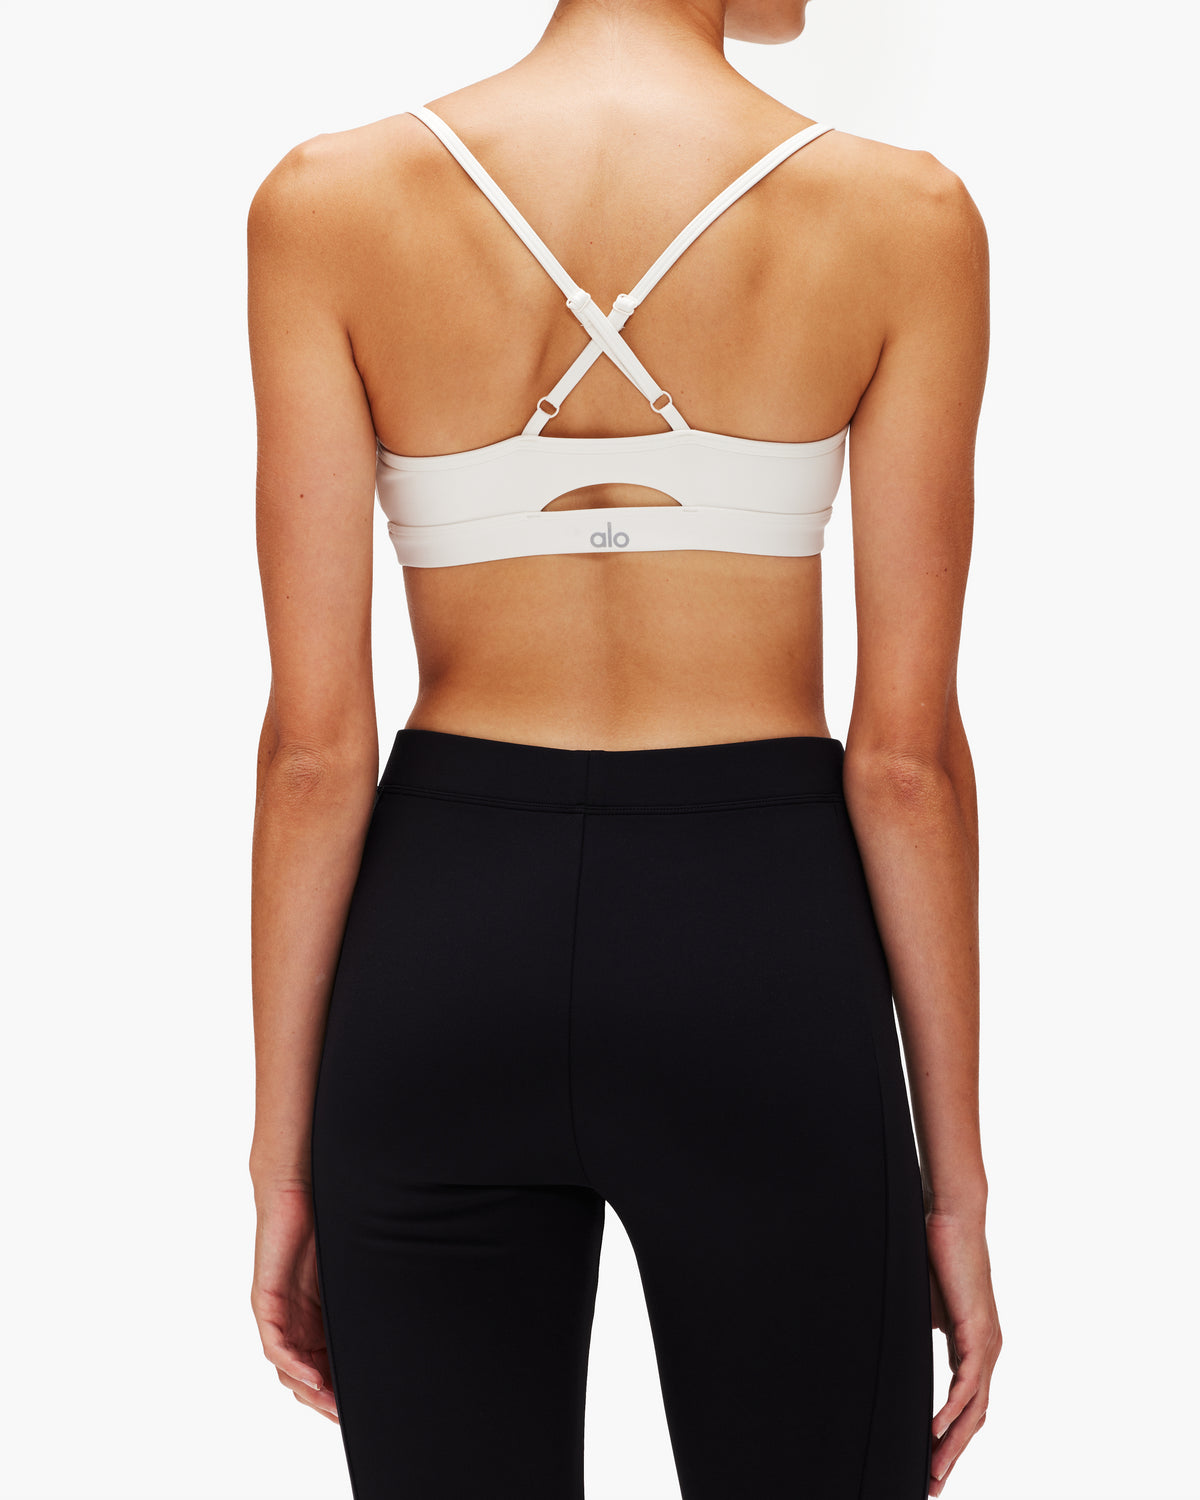 Alo Yoga Airlift Intrigue Bra – The Shop at Equinox